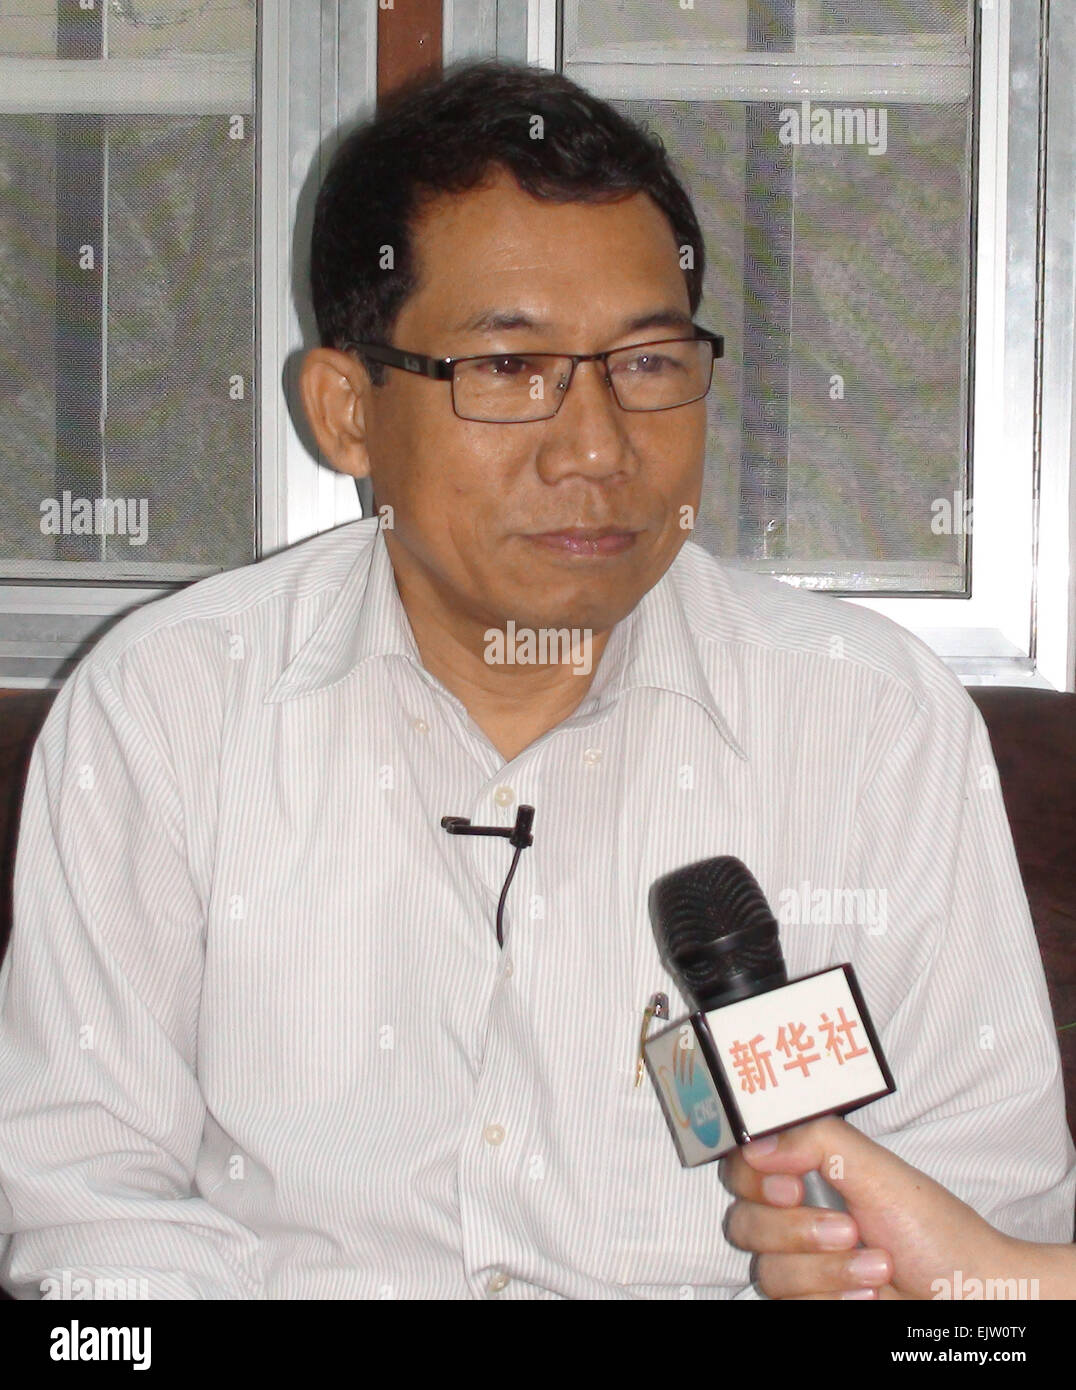 Yangon, Myanmar. 1st Apr, 2015. Dr Aye Muang, parliament member of the Upper House and chairman of Arakan National Party (ANP), receives an interview with Xinhua in Yangon, Myanmar, on April 1, 2015. Dr Aye Muang said on Wednesday that China's advocation of the concept of 'Belt and Road' initiative is a measure which will benefit neighboring countries and bring development to the region as well. © Ko Thaung/Xinhua/Alamy Live News Stock Photo